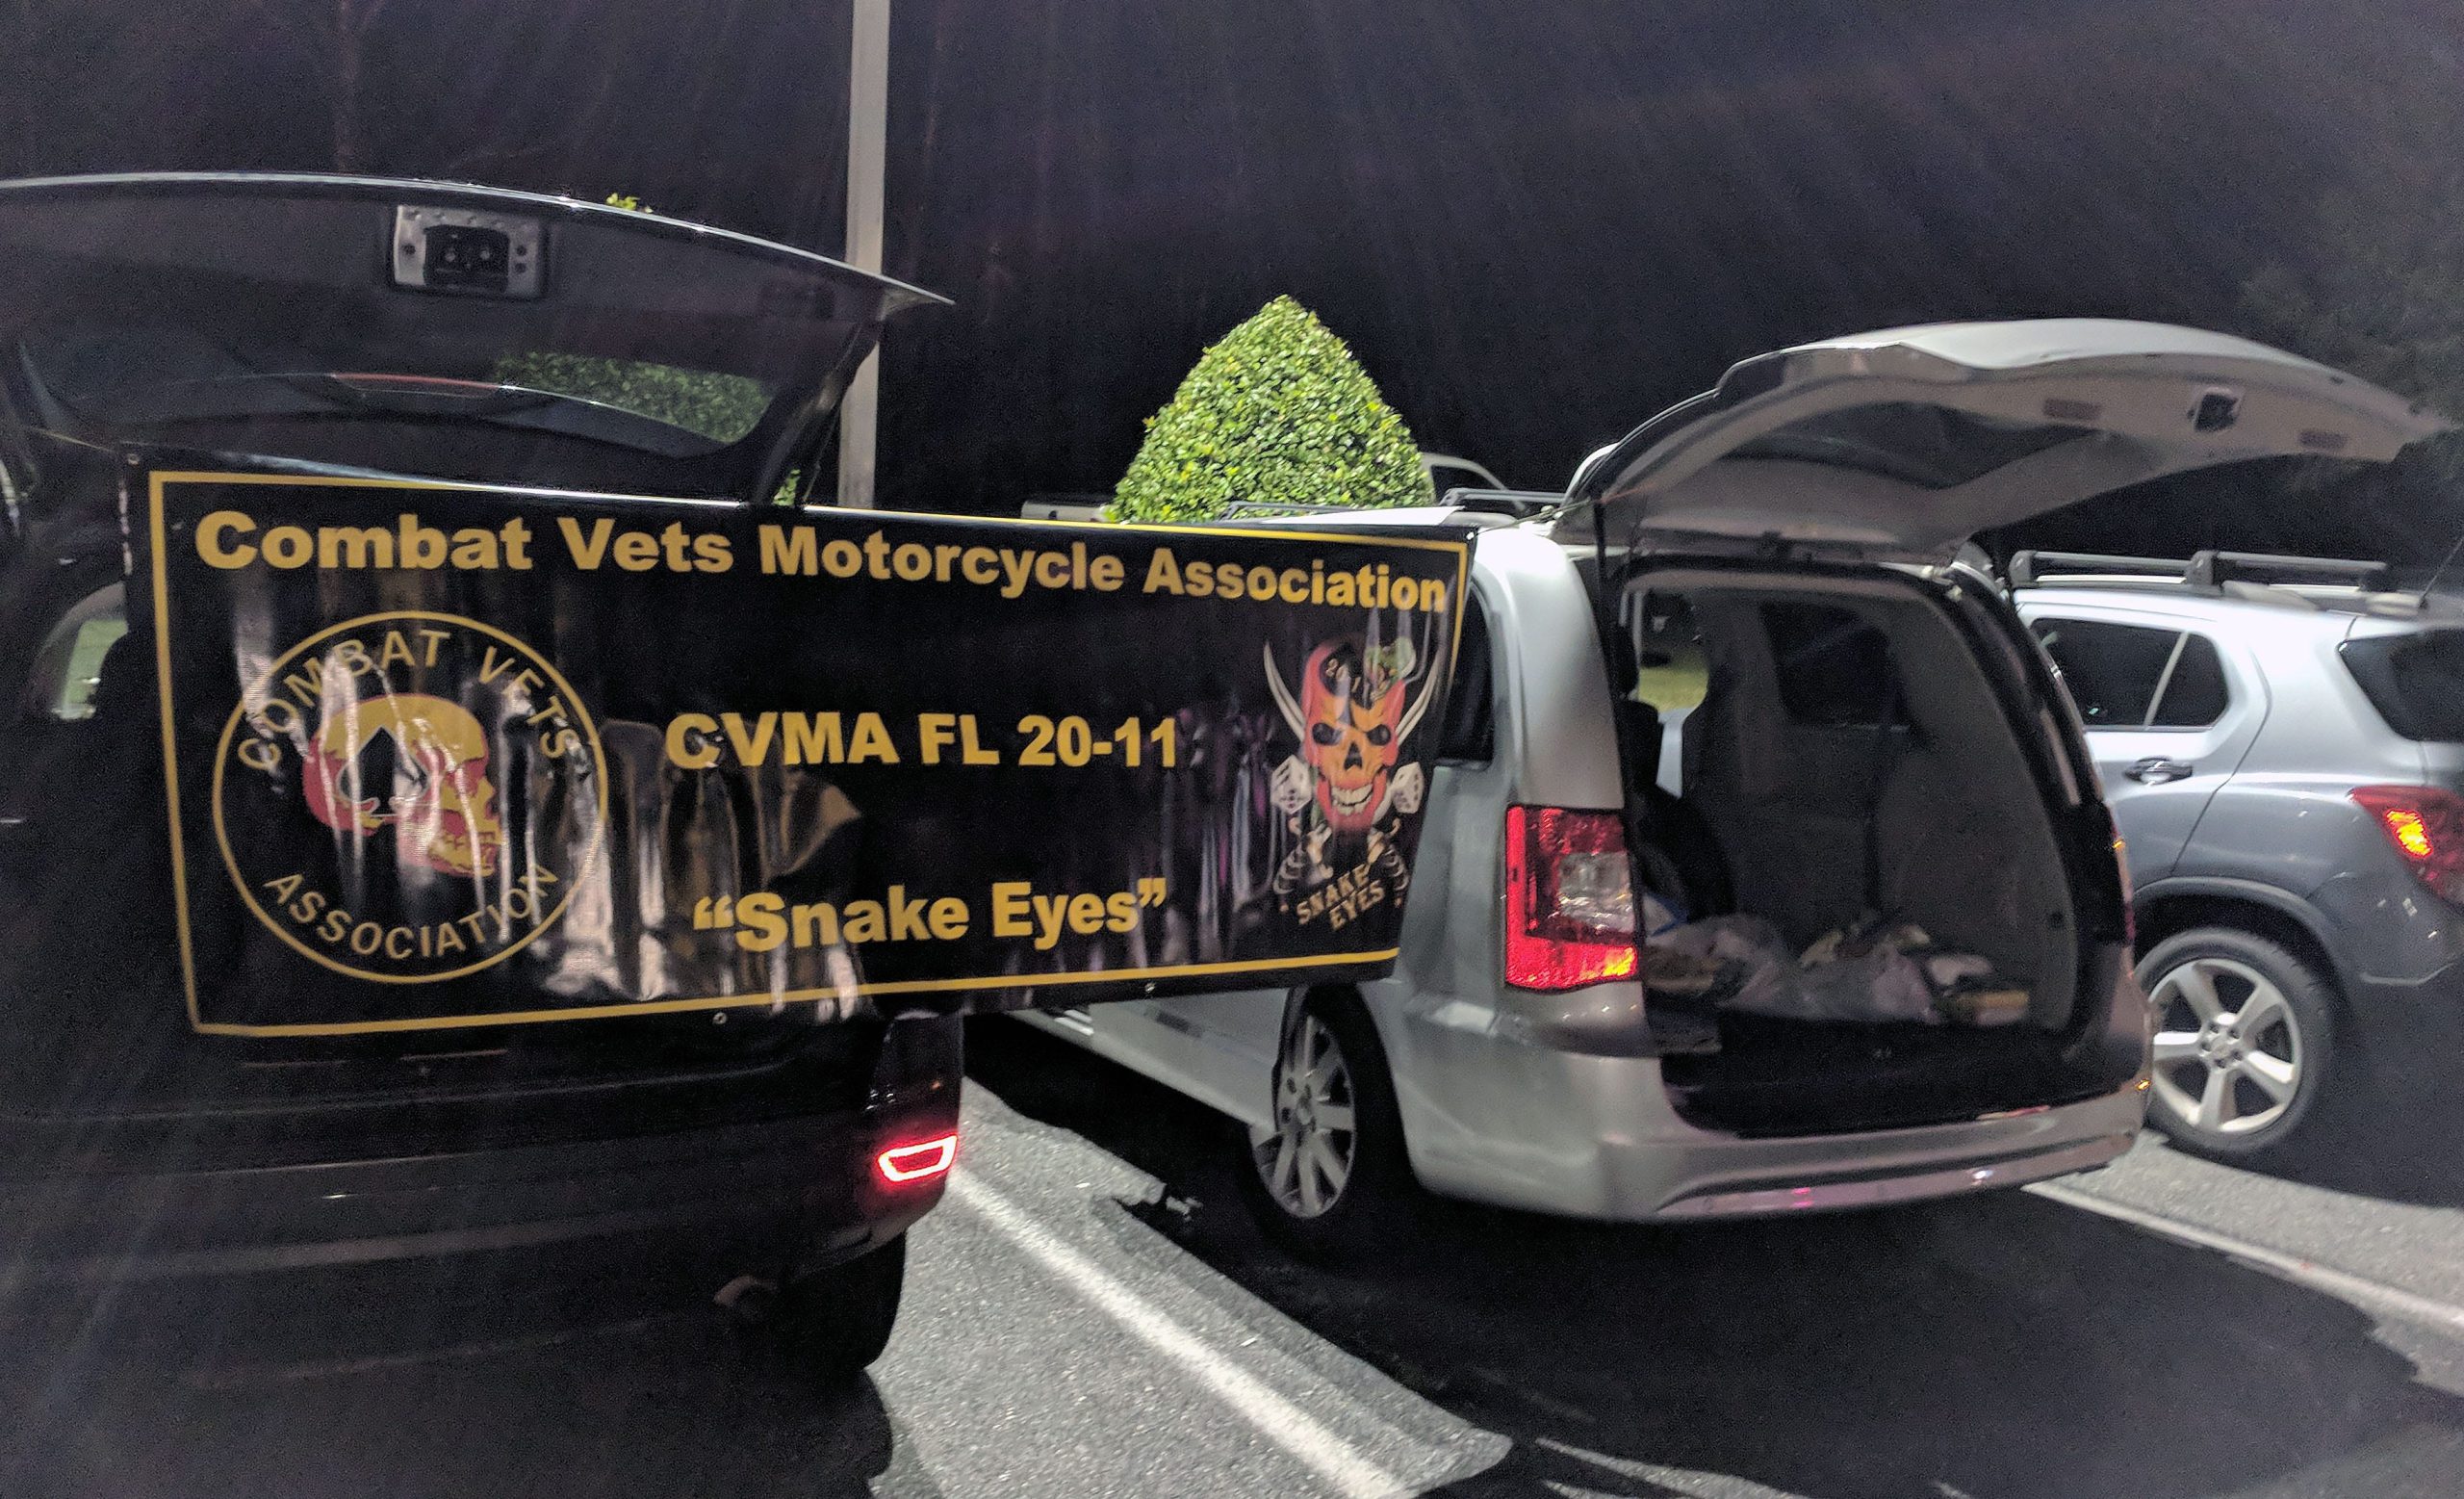 The Combat Veterans Motorcycle Association (CVMA) chapter FL 20-11 , also called "Snake Eyes," dedicated their bike night to gather cold weather donations for the homeless during "Operation Cold Front" at Johnny O'Quigley's on Nov. 29. [KAYLIN PARKER | NEWS BULLETIN]